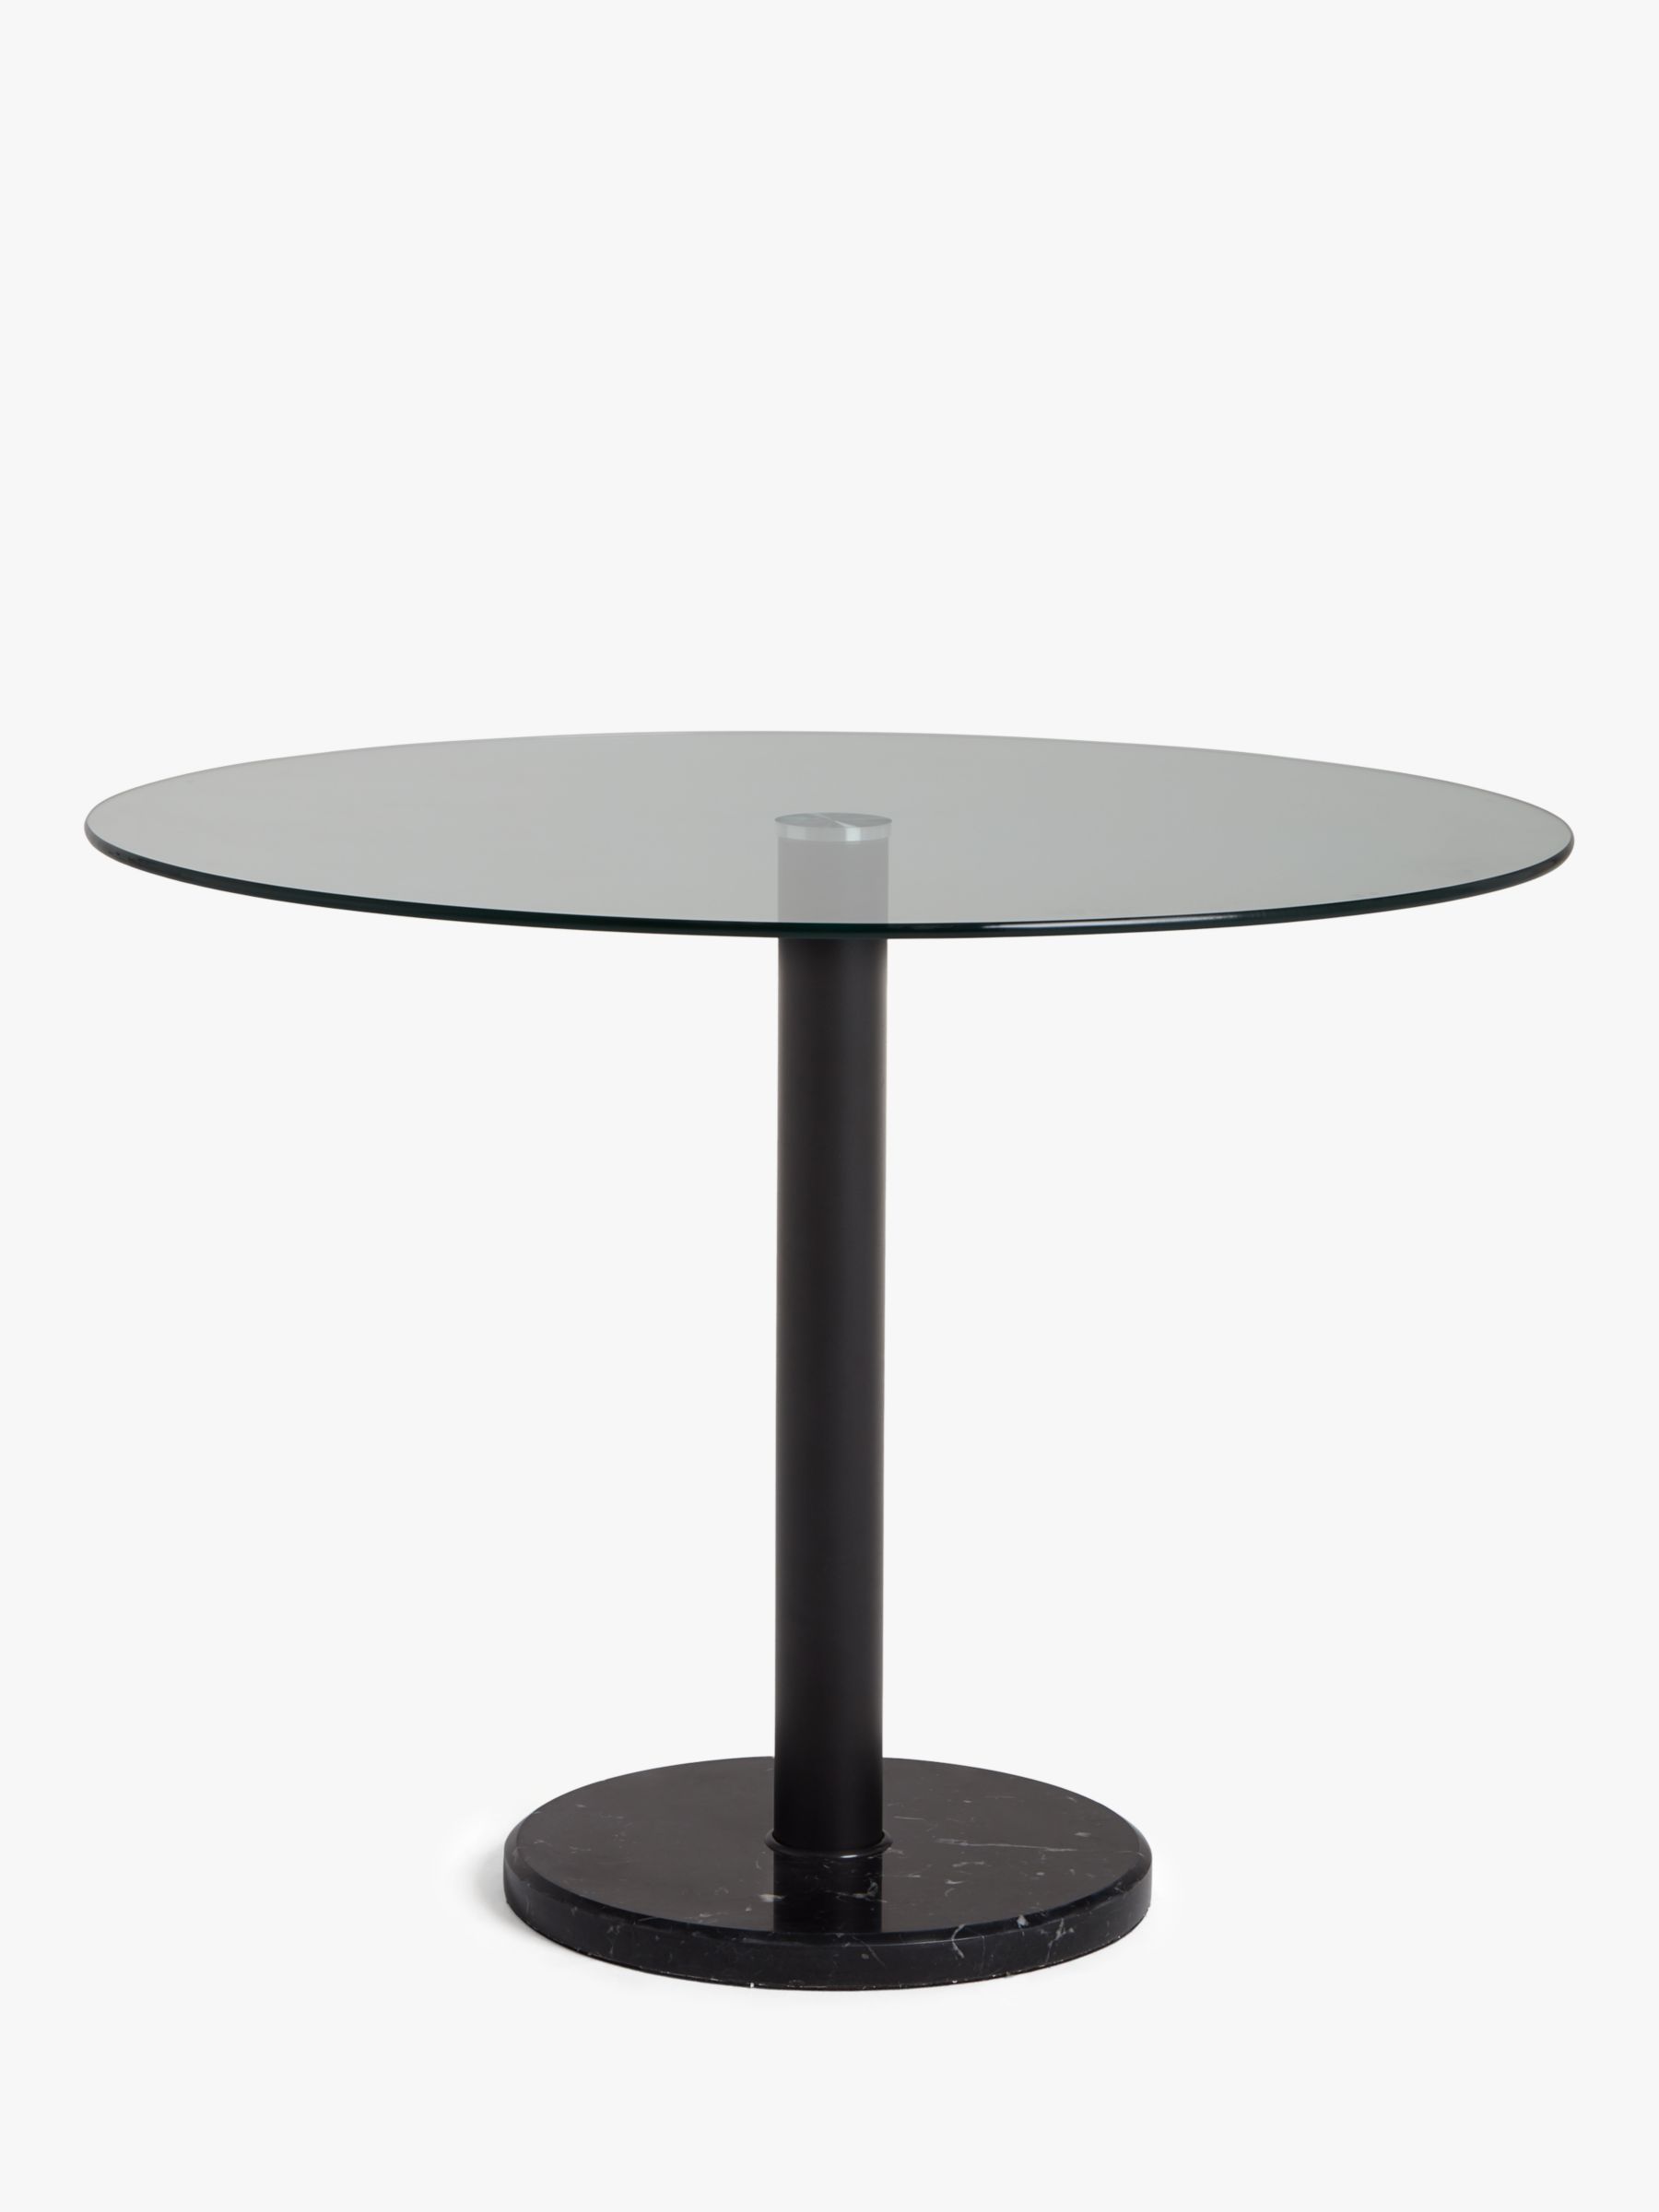 Photo of John lewis anyday enzo 4 seater glass round dining table black marble